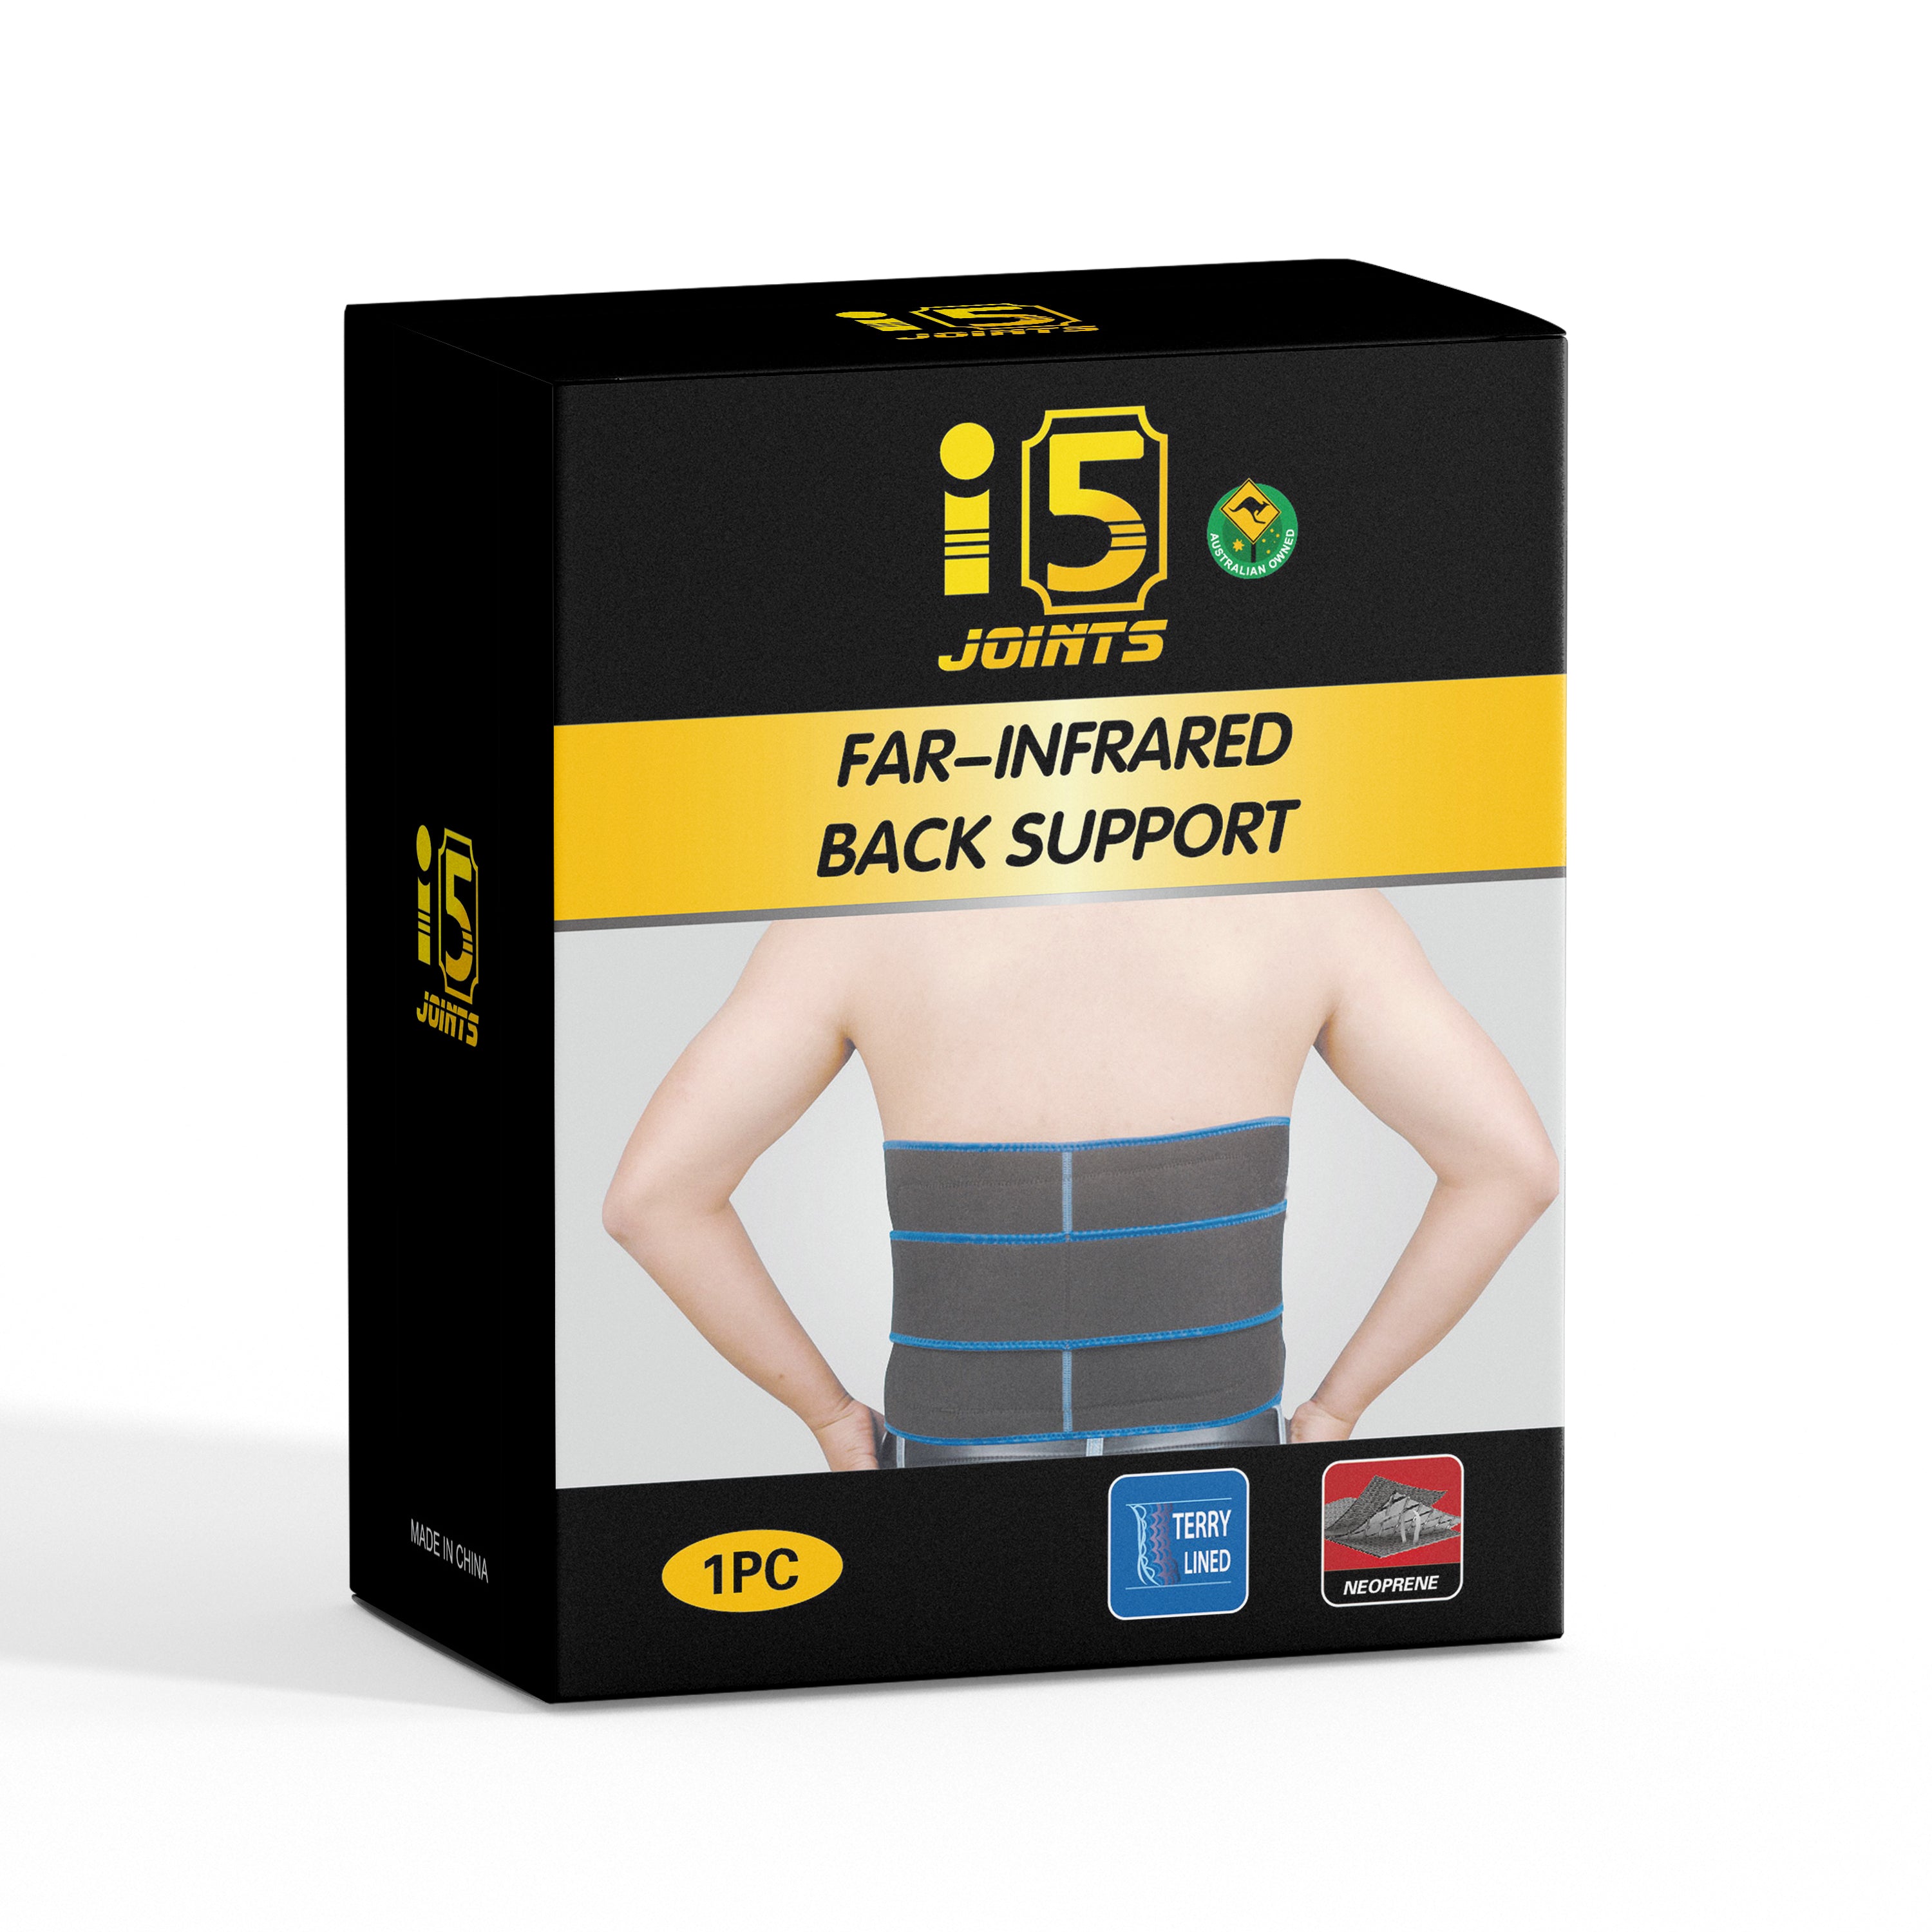 I5Joints-Infrared Lower Back Support(I5Joints Comfort Belt for Lower Back Pain Relief, for Better Posture and Pain Relief and Added Gel Padding for Comfort)